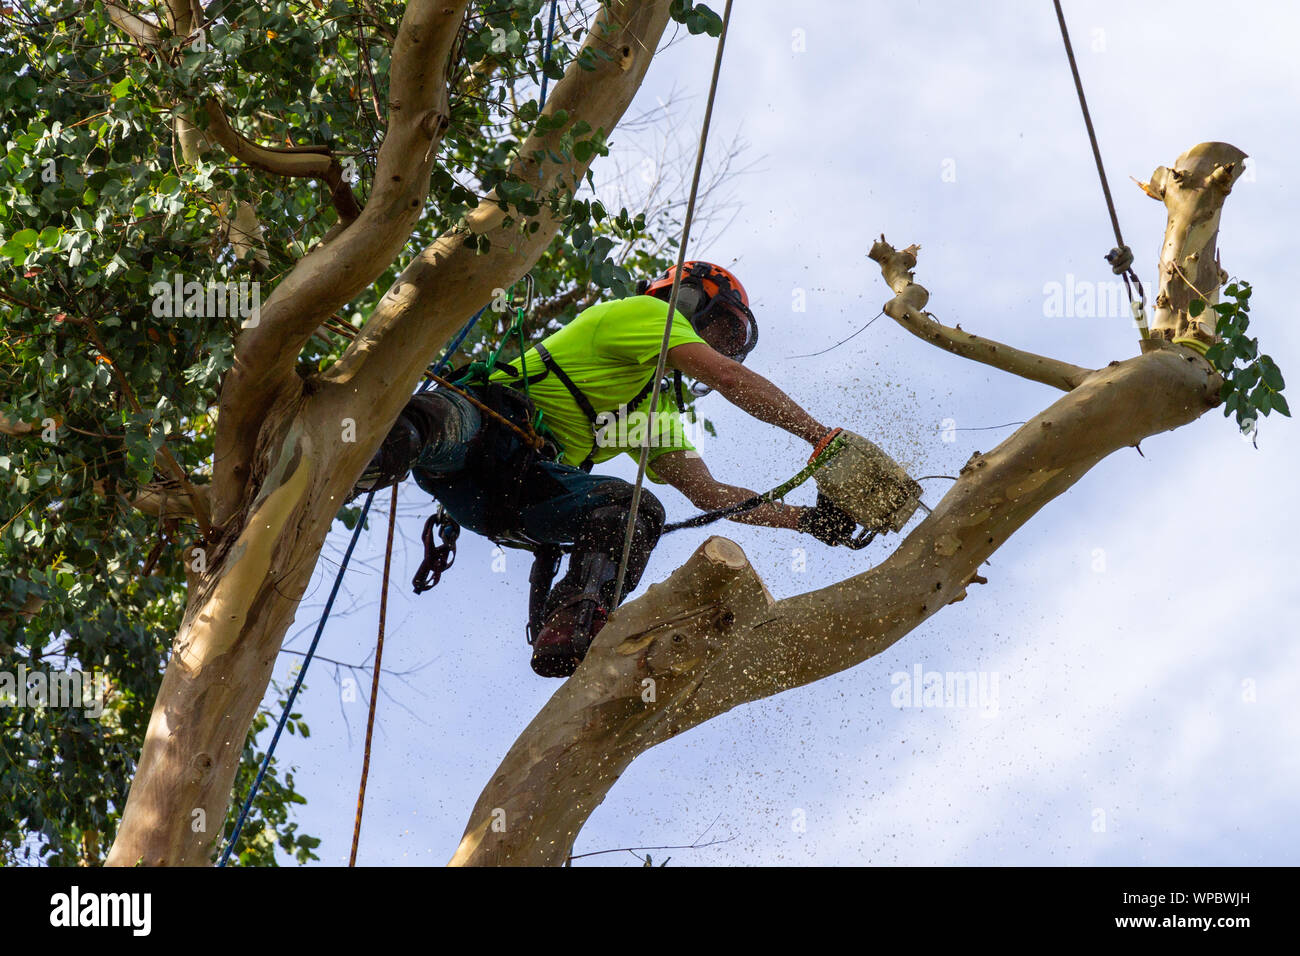 Lumberjack or tree surgeon felling a Eucalyptus tree with a chainsaw Stock Photo